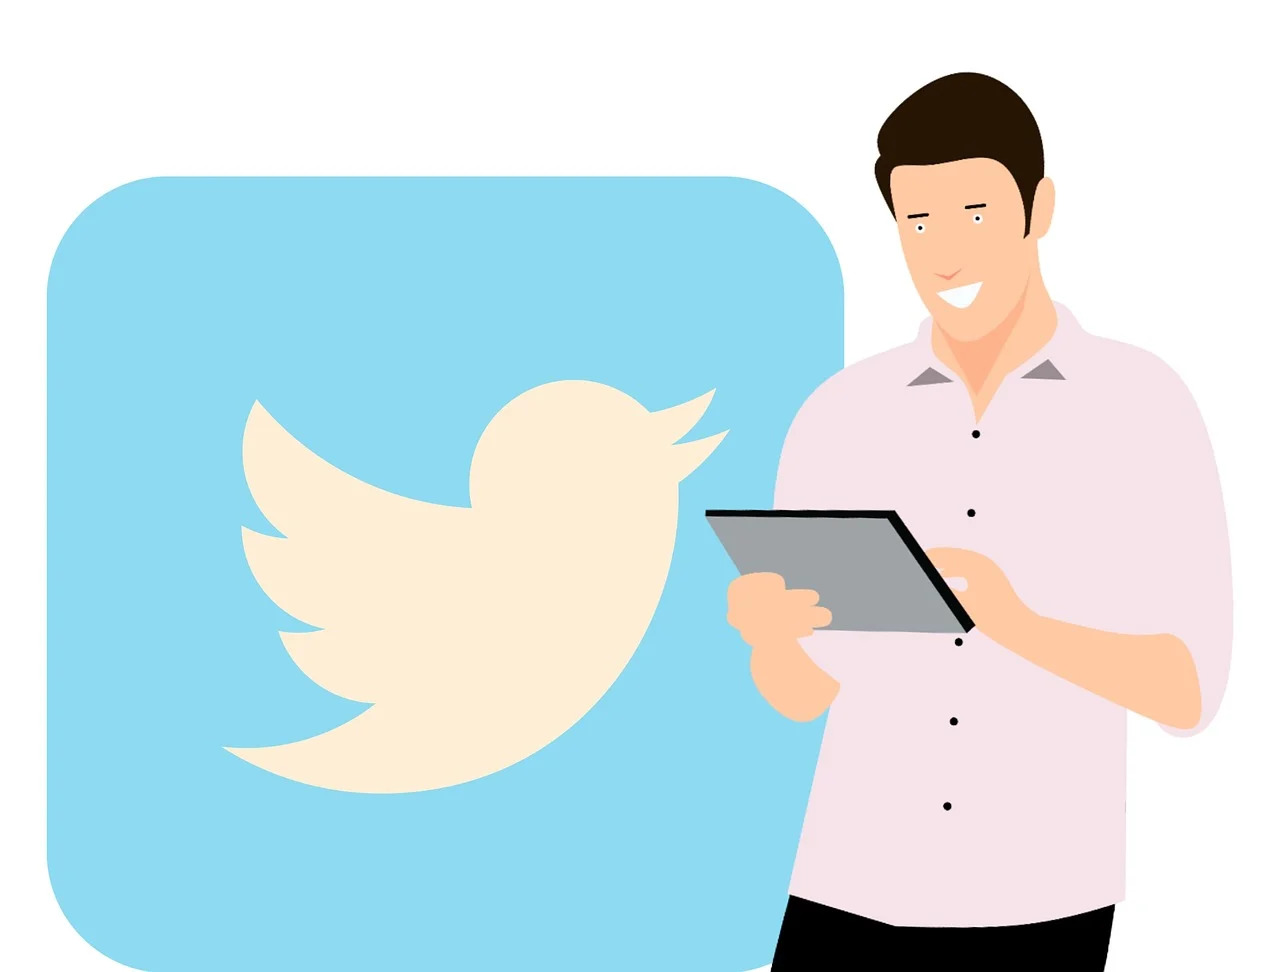 Try Leveraging Twitter Networks